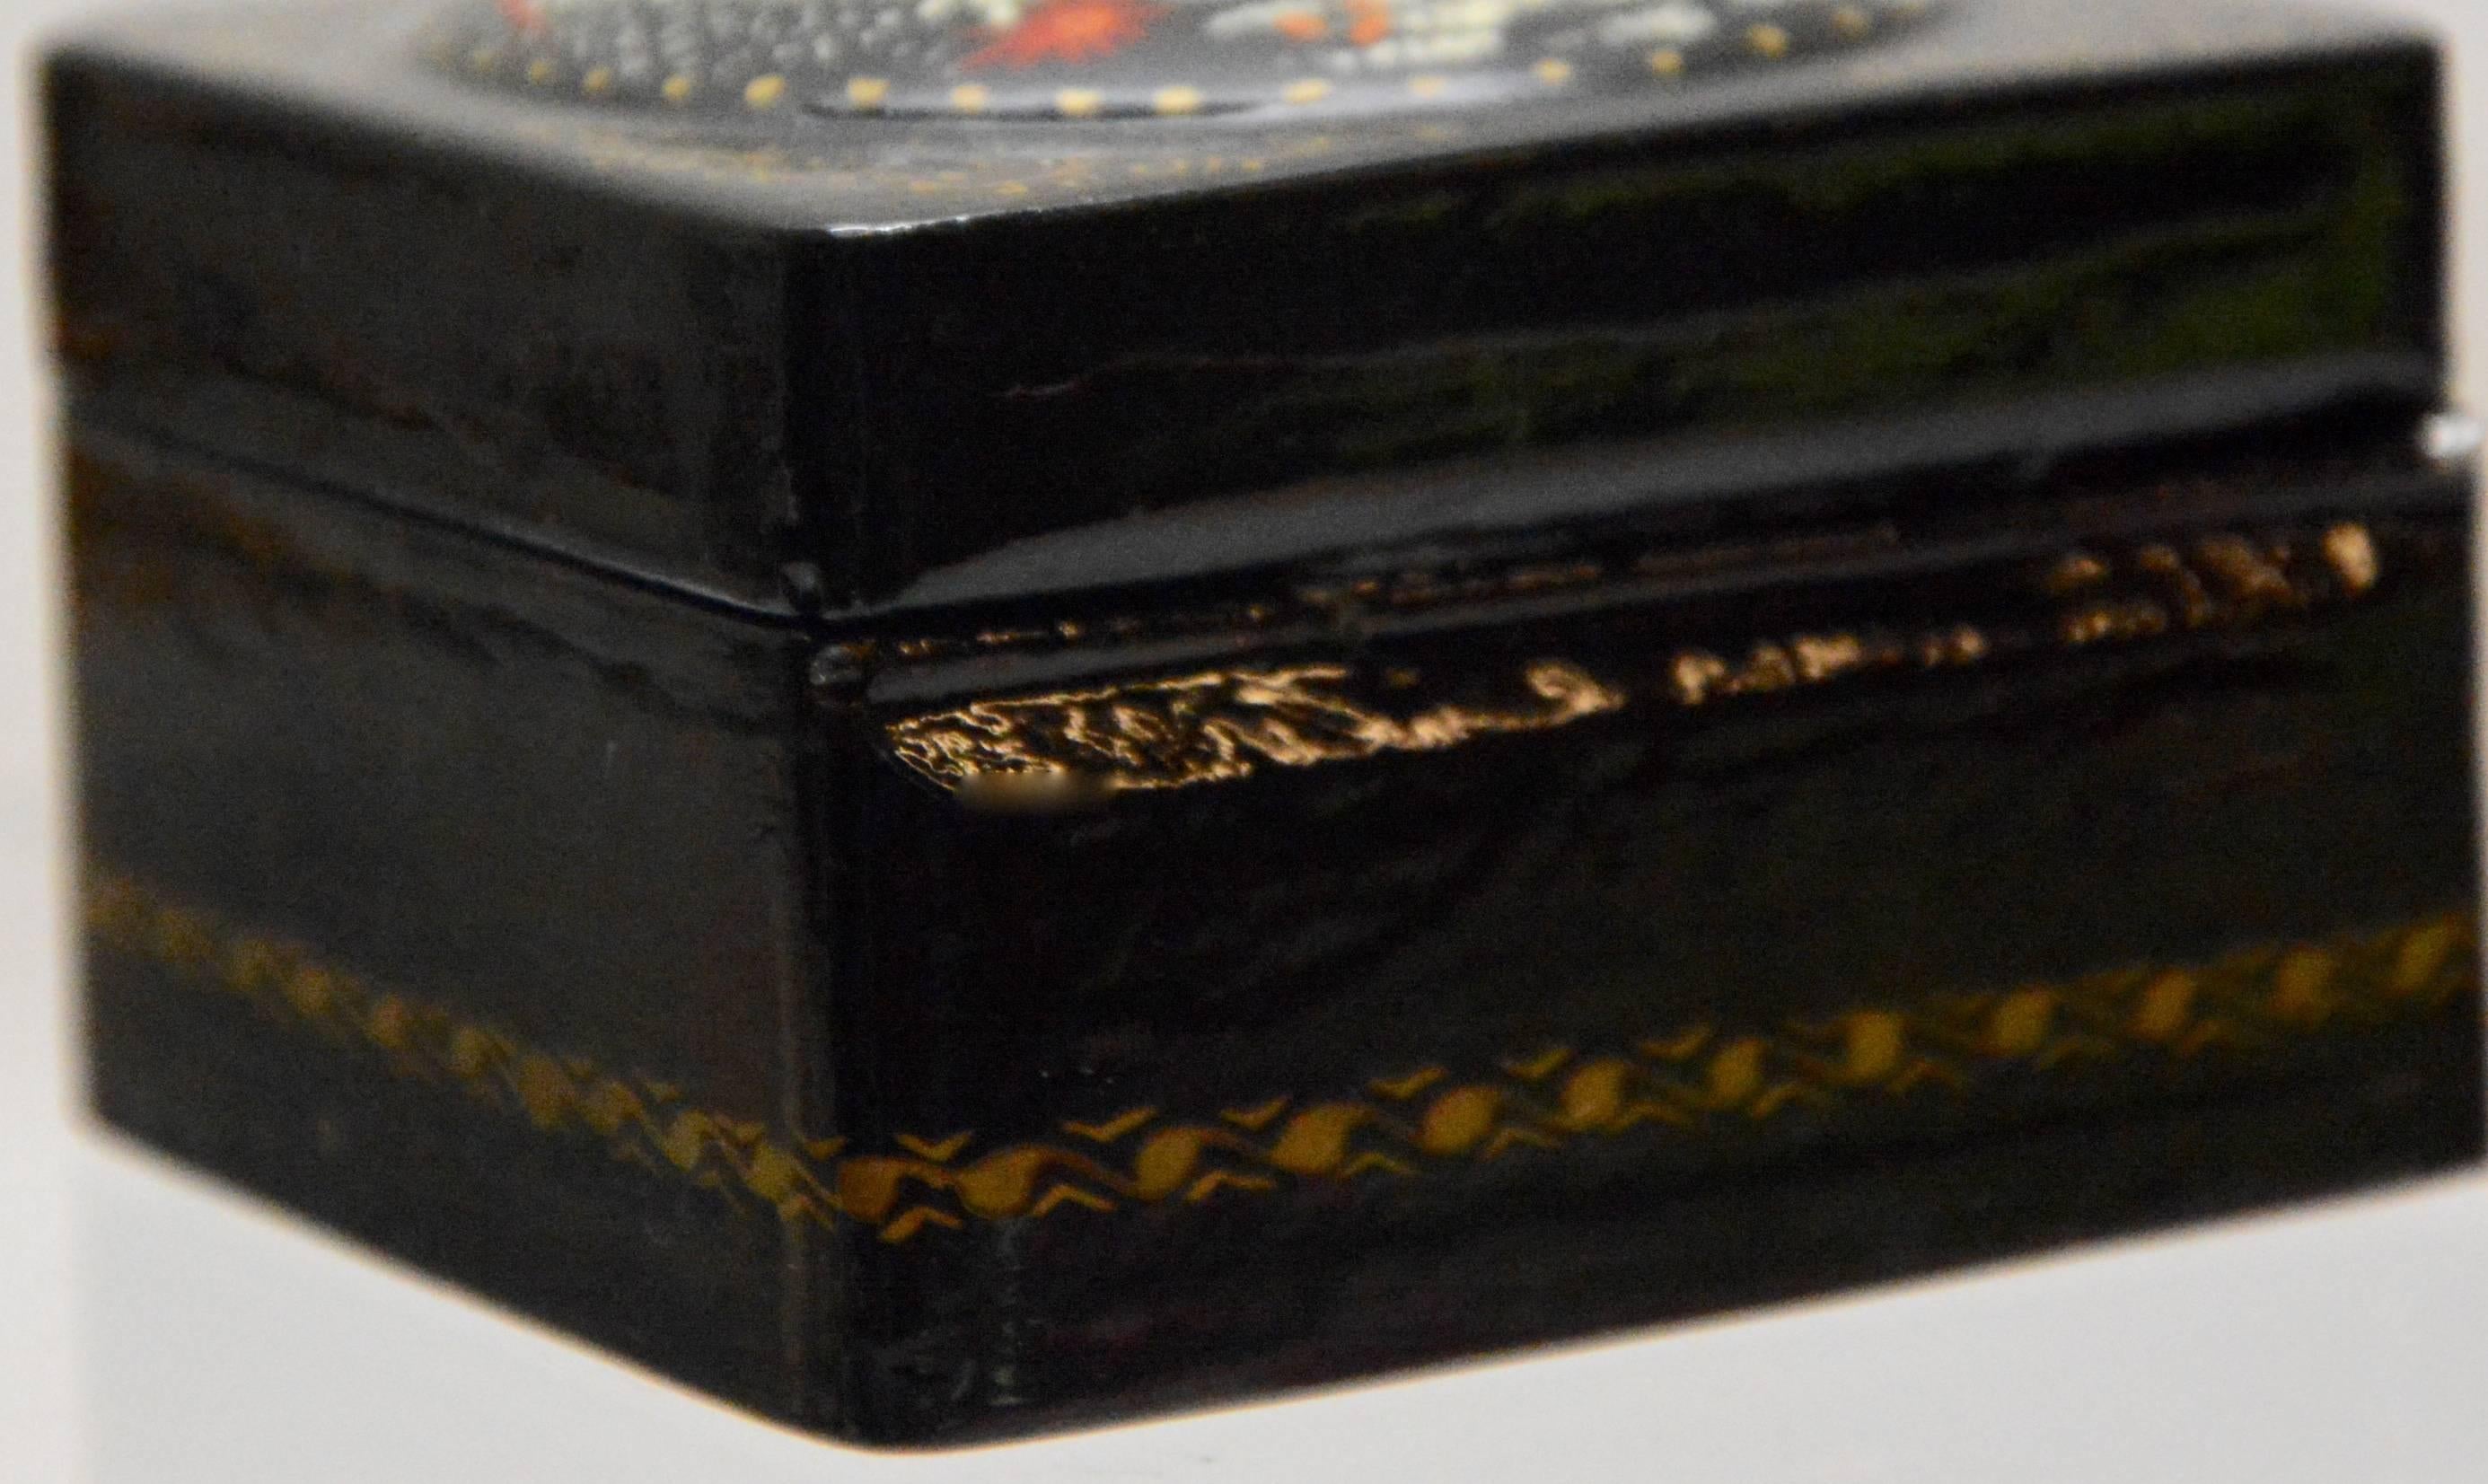 A lovely winter scene is hand painted on this hand painted Russian lacquer box. The black is enhanced with gold detailing and the interior has a vibrant red finish. The piece is signed underneath the winter scene.